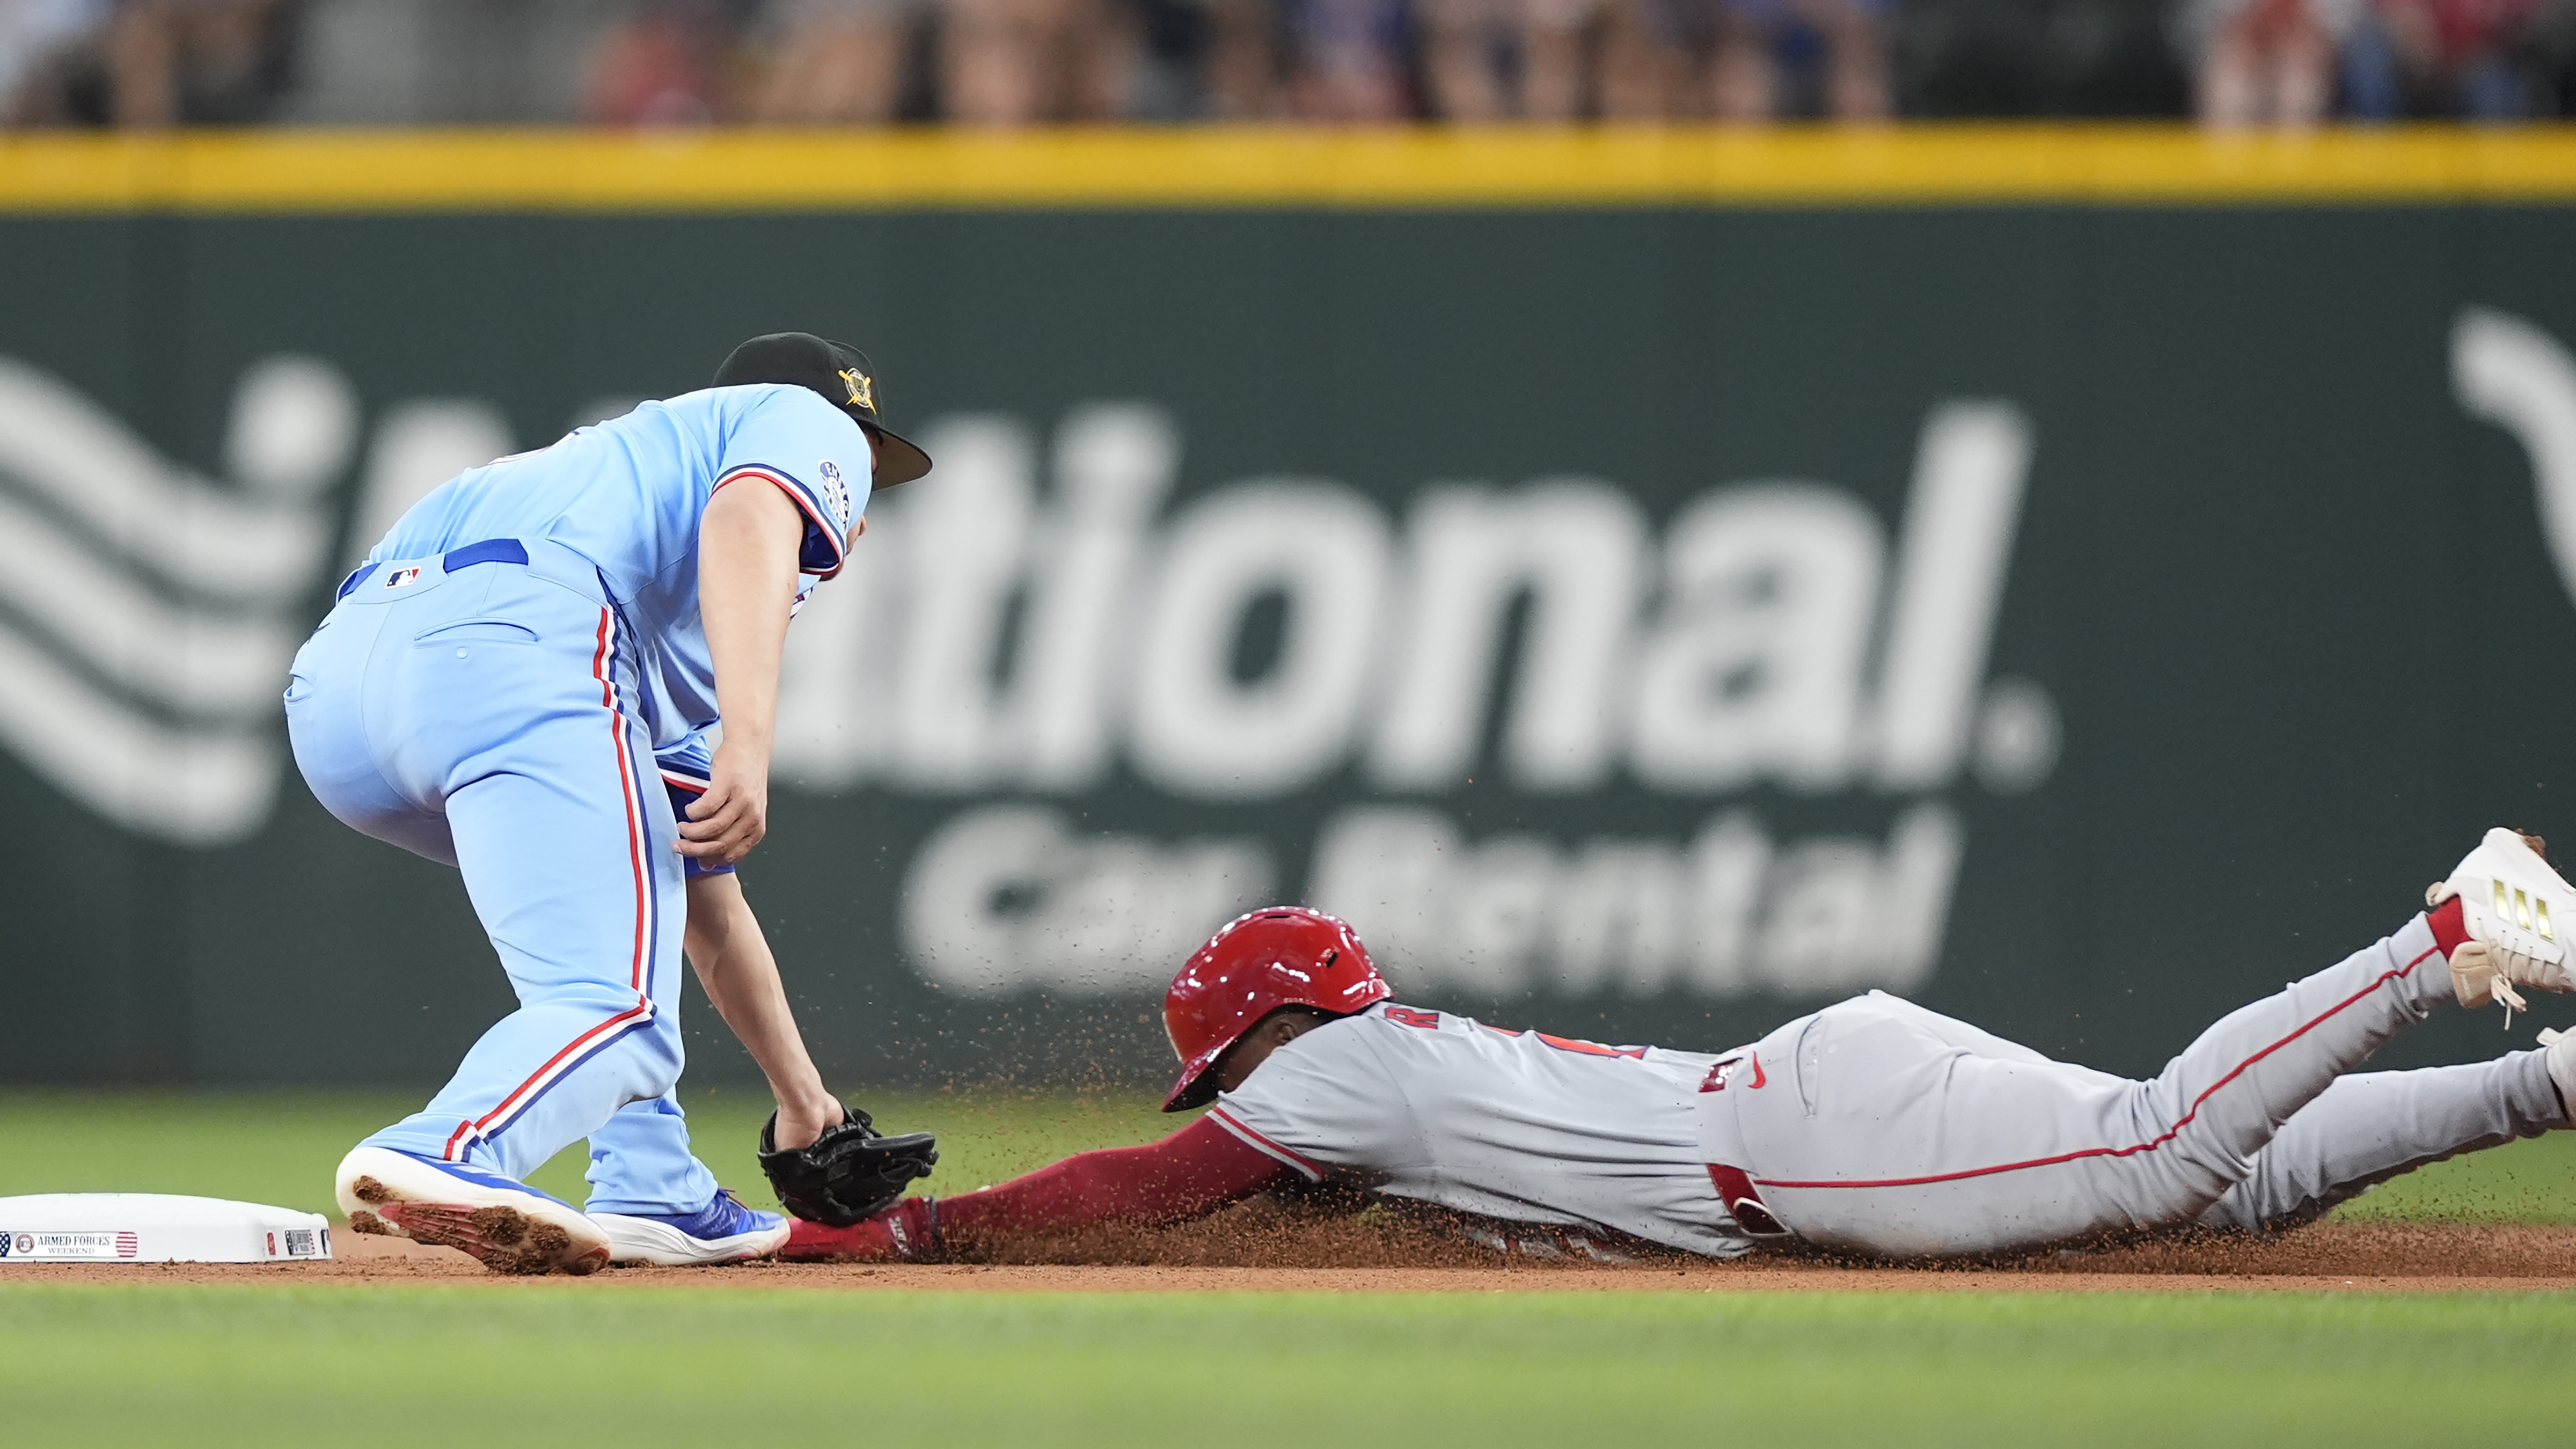 Soriano's career-long start and Pillar's pinch-hit get Angels
series-clinching win at Texas